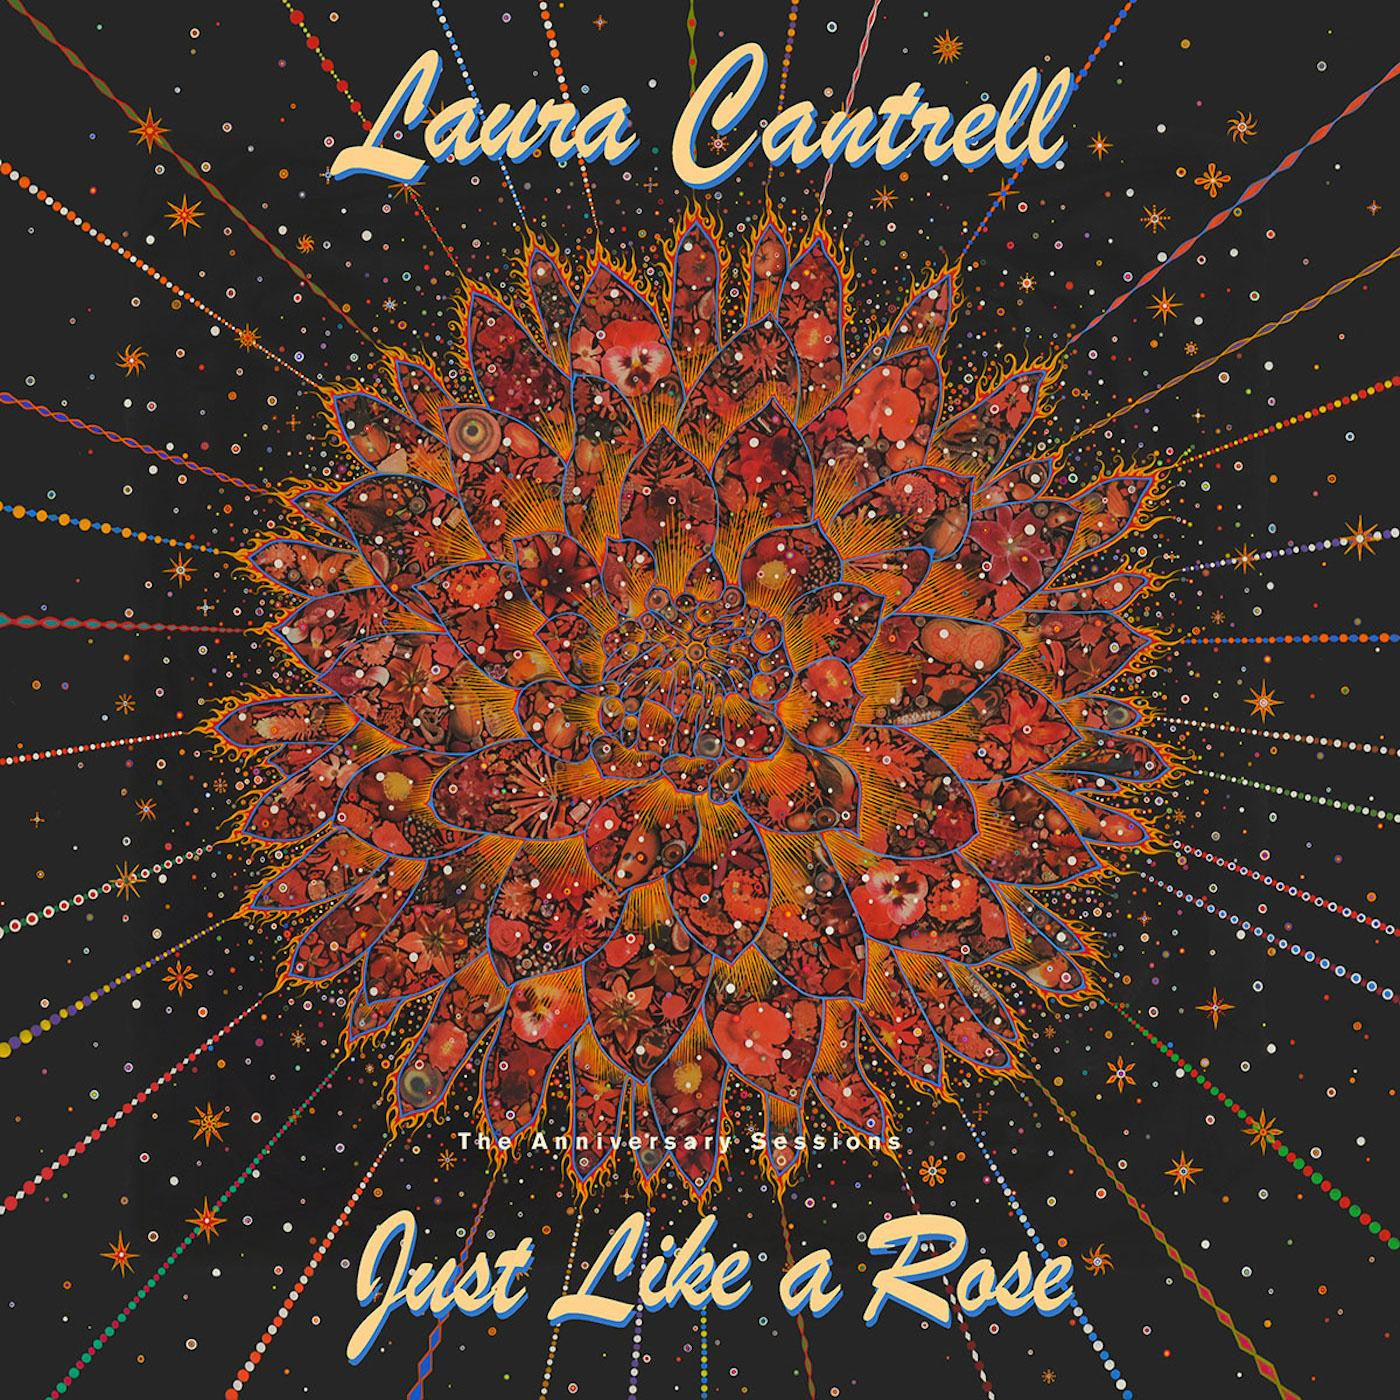 Laura Cantrell - Just Like A Rose: The Anniversary Sessions [Transparent Green Vinyl]